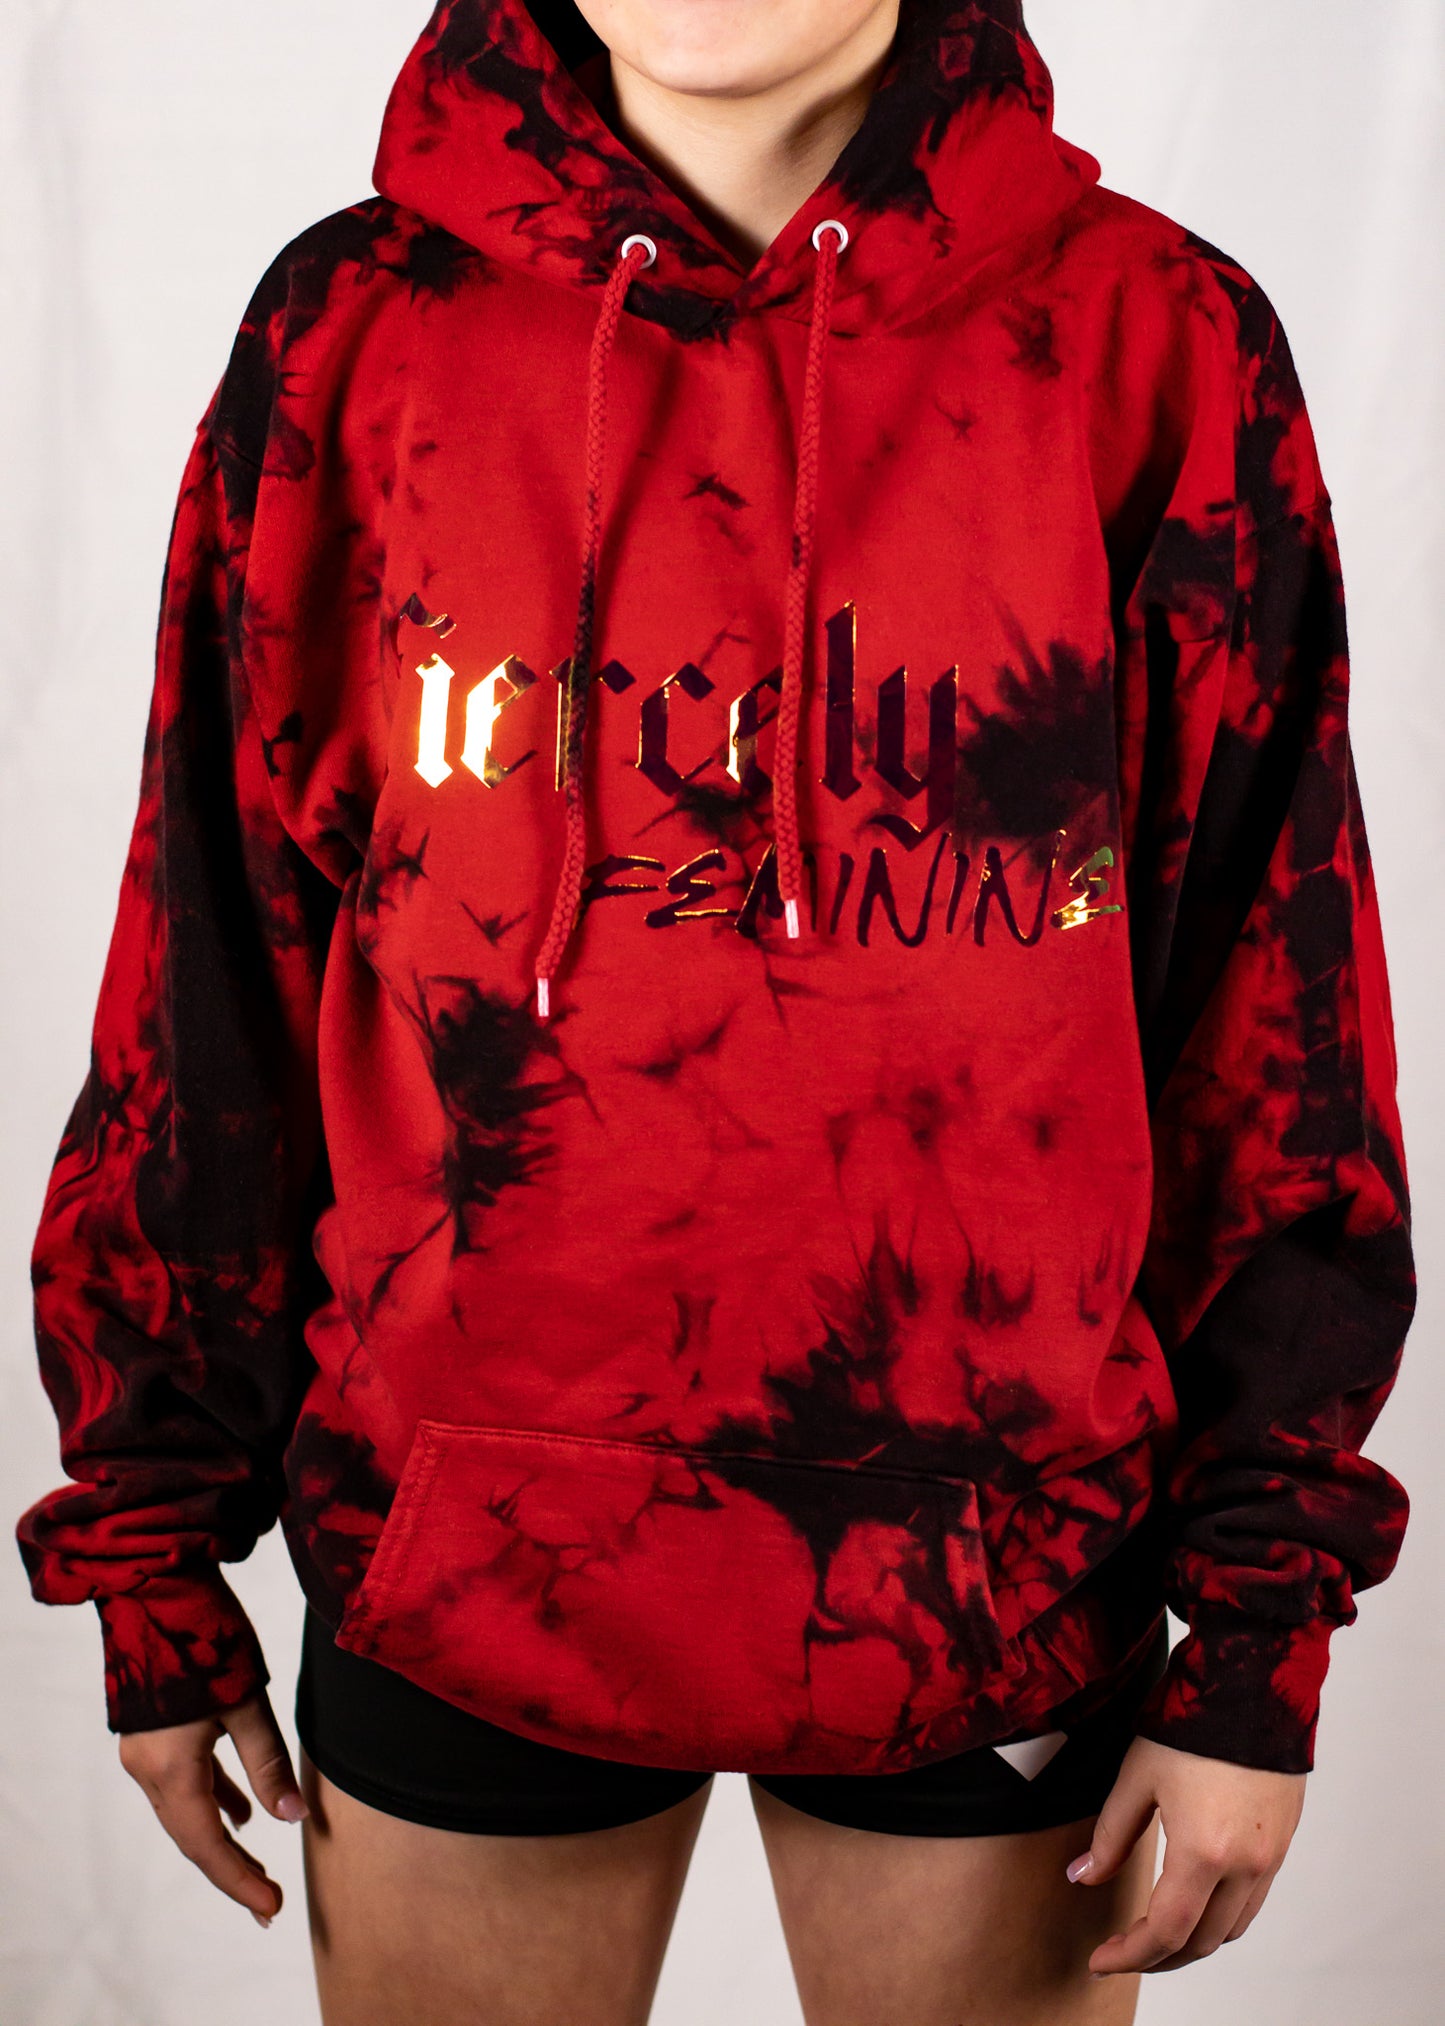 Unisex Black and Red Tie Dye Holographic Pullover Hoodie